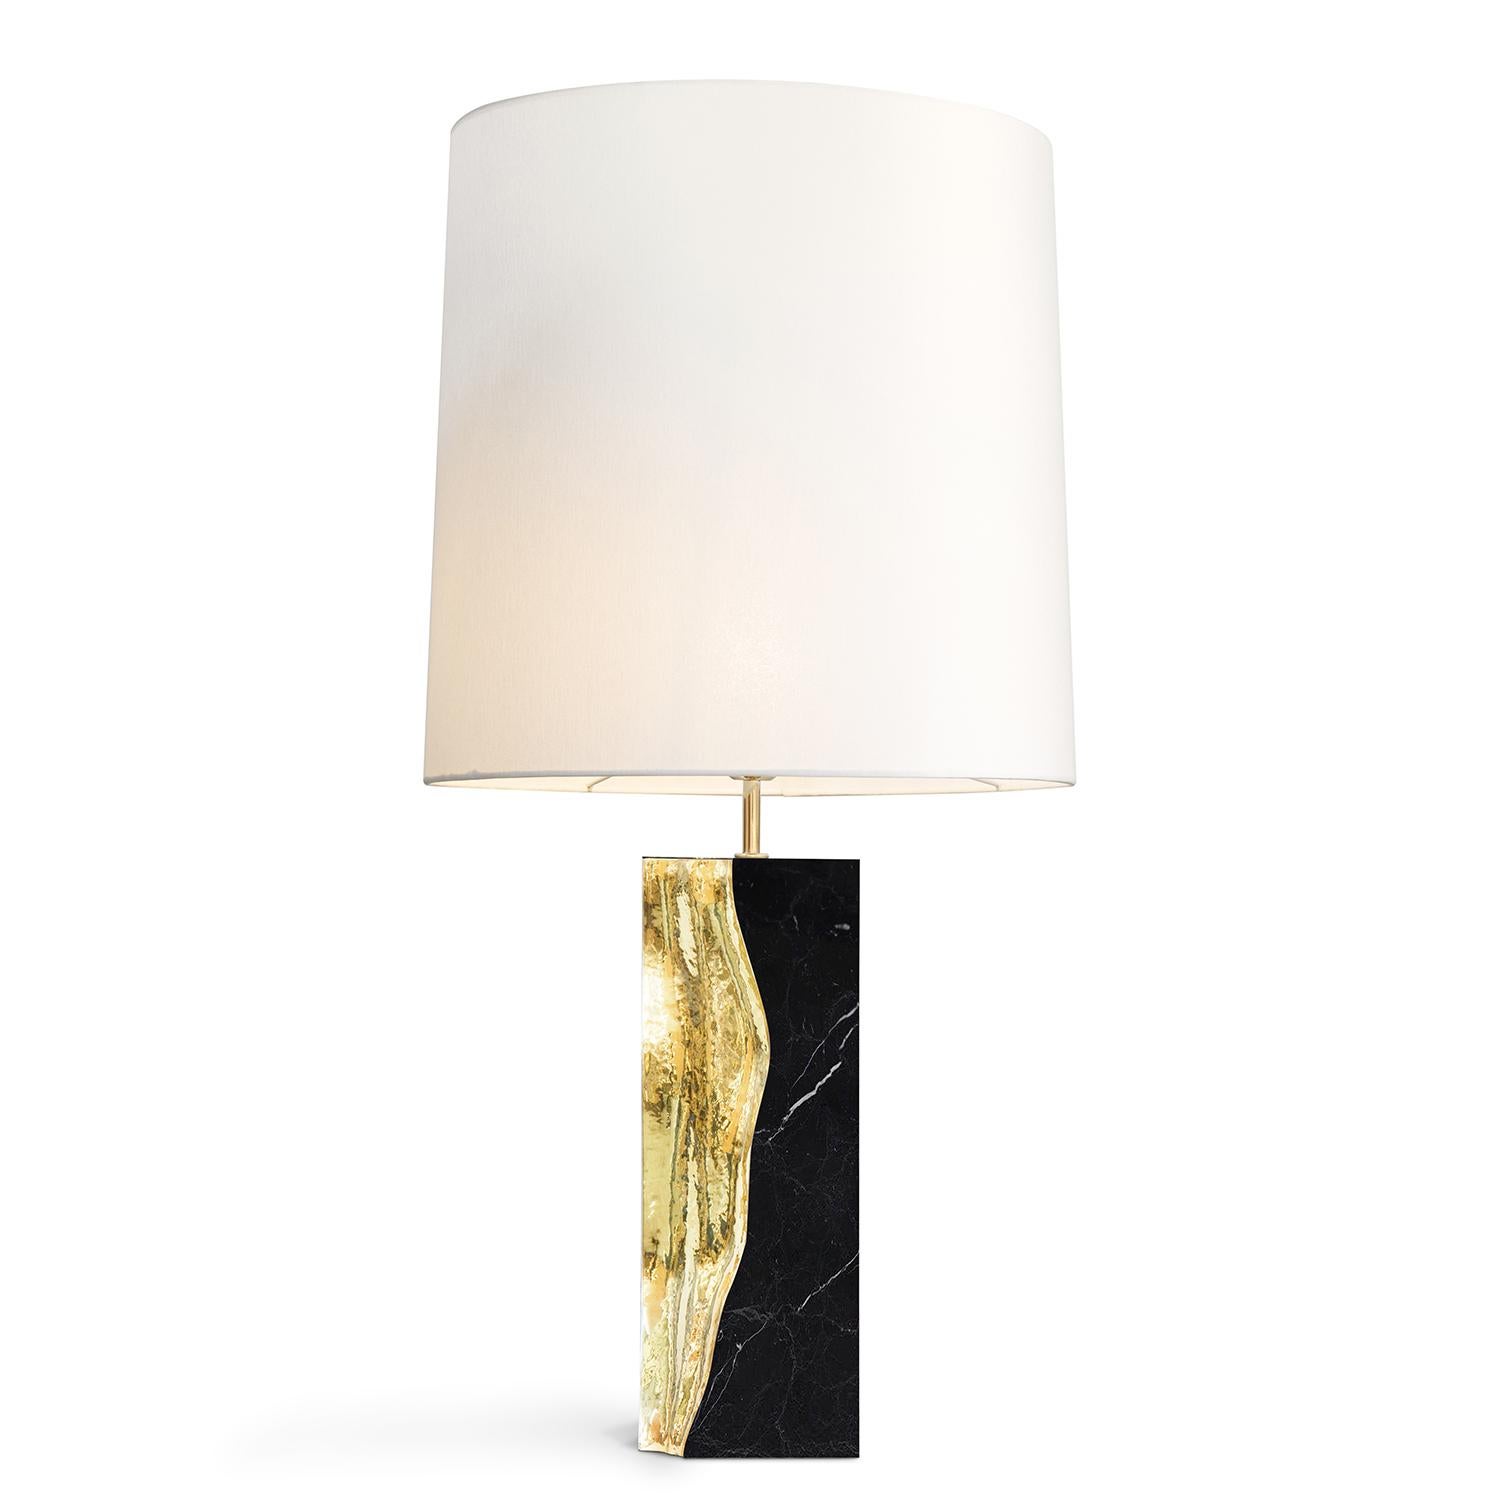 Paradise Black Marble Table Lamp with black marble base
carved and polished. Base including polished brass detail,
including a round shade, dimensions : Diameter 40xH45cm.
Base dimensions: L15xD15xH40cm.
1 bulb, lamp holder type E27, max 40 watt,